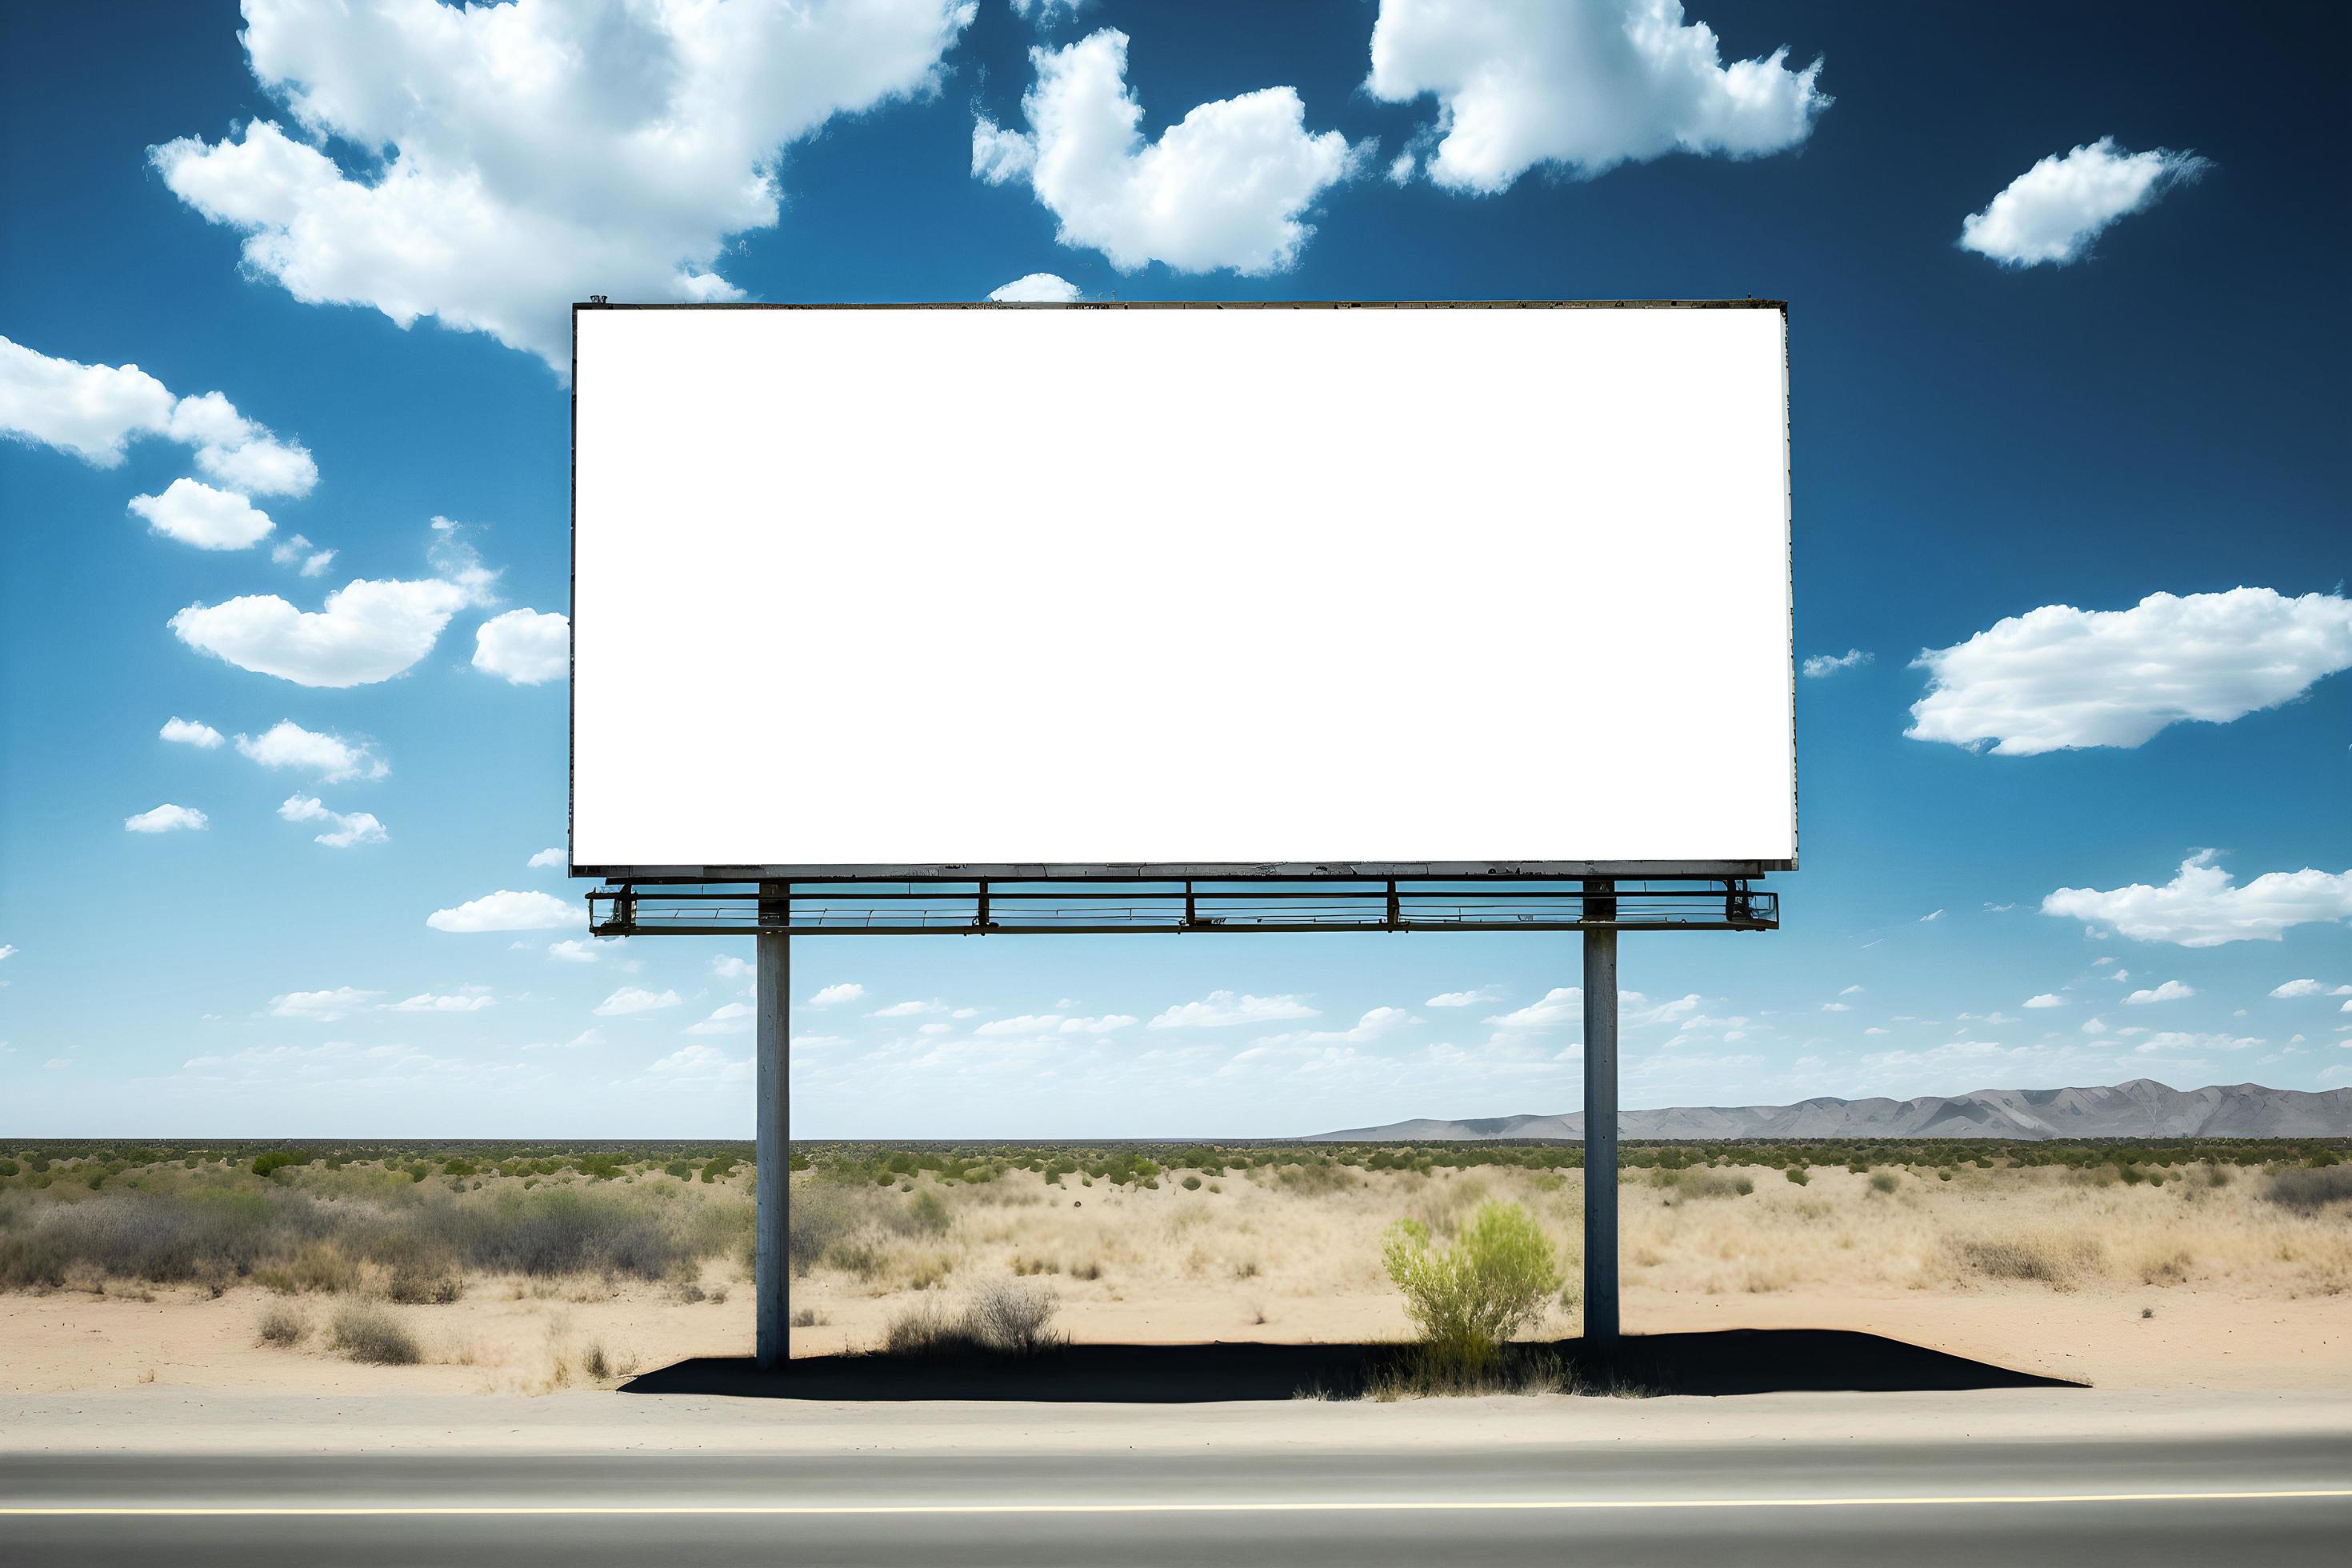 https://static.vecteezy.com/system/resources/previews/022/695/437/large_2x/empty-billboard-on-highway-in-daytime-in-summer-front-view-billboard-mockup-blank-advertisment-space-for-marketing-banner-or-poster-free-photo.jpg